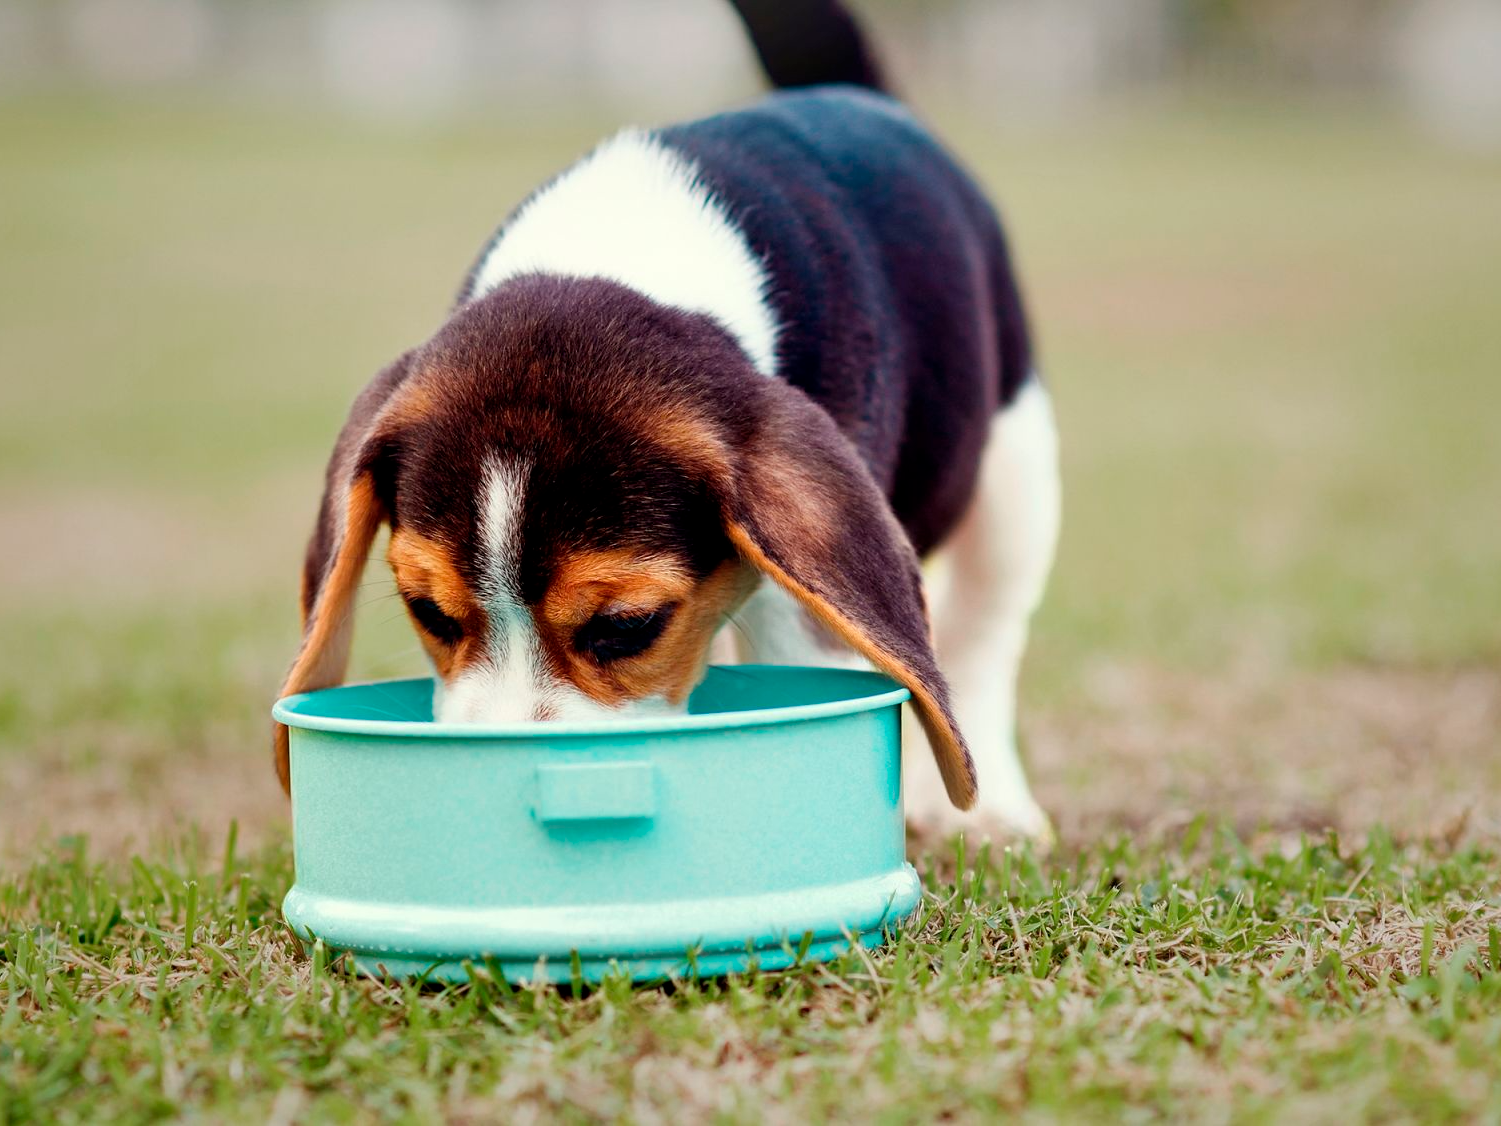 Puppy Beagle standing outside in a garden eating from a small bowl